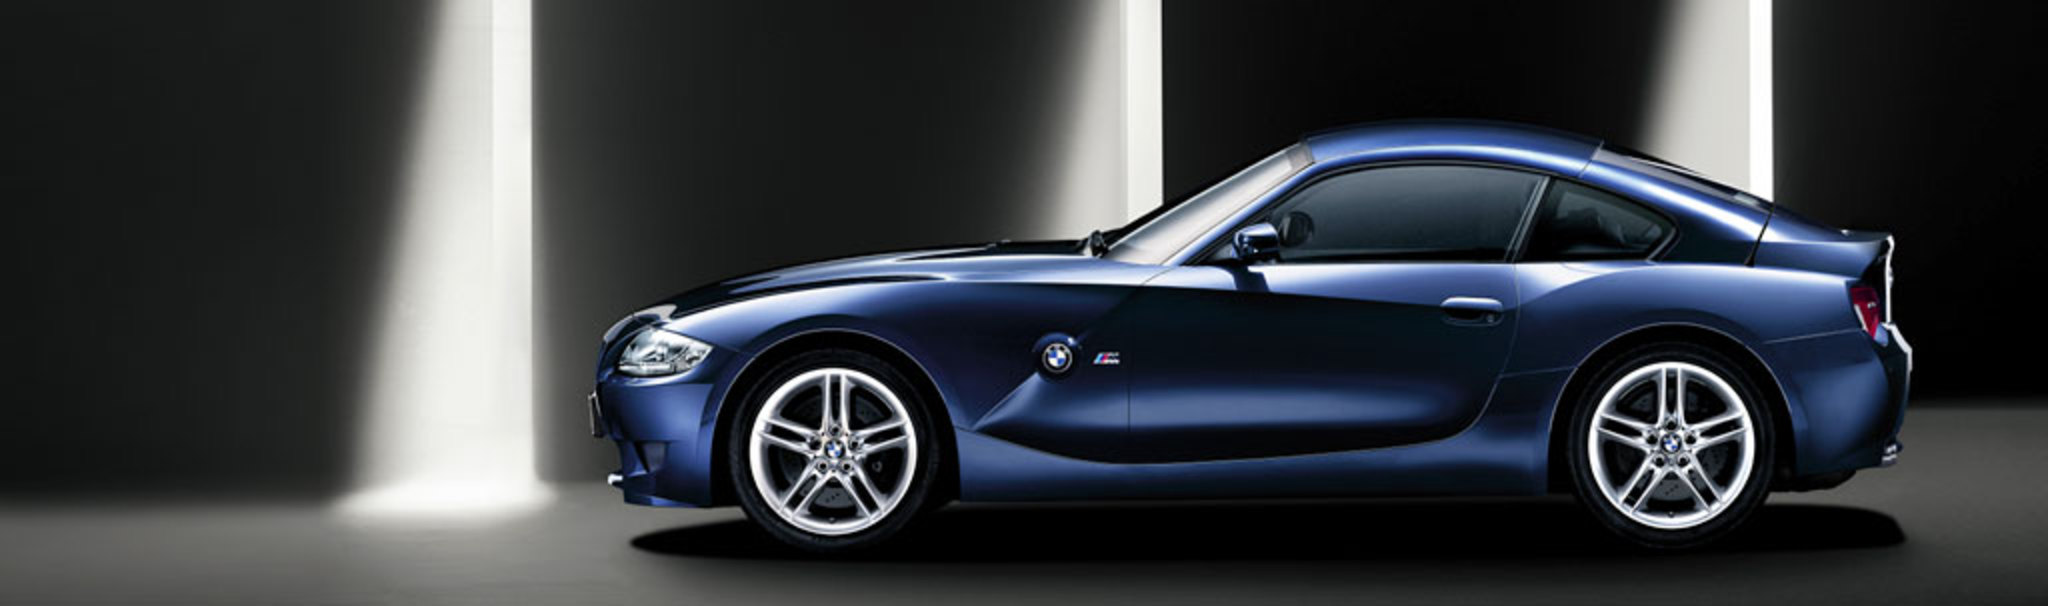 Even when stationary, the design of BMW Z4 M CoupÃ© still resonates with